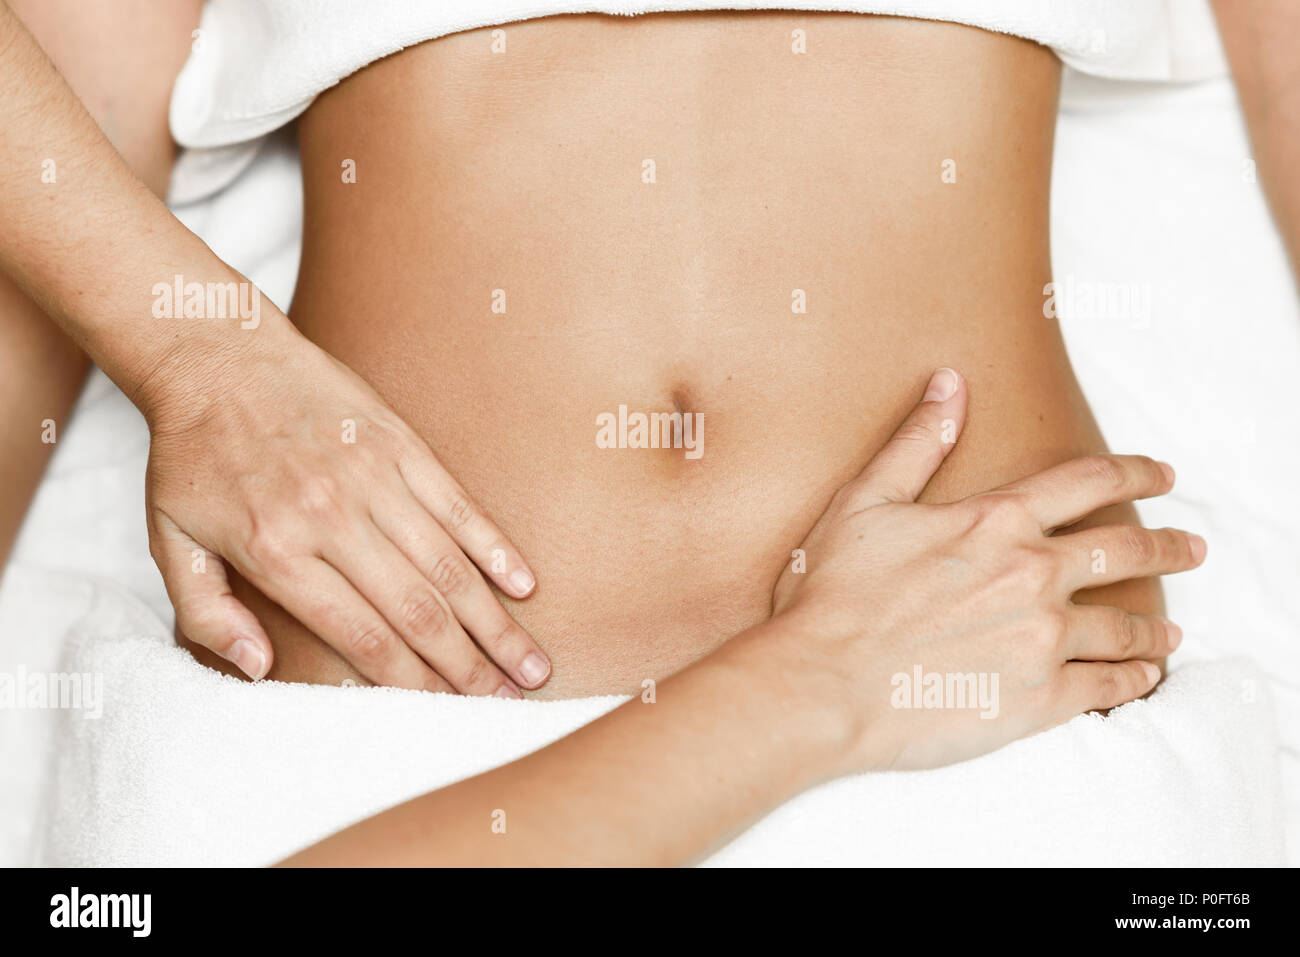 Top view of hands massaging female abdomen.Therapist applying pressure on belly. Woman receiving massage at spa salon Stock Photo